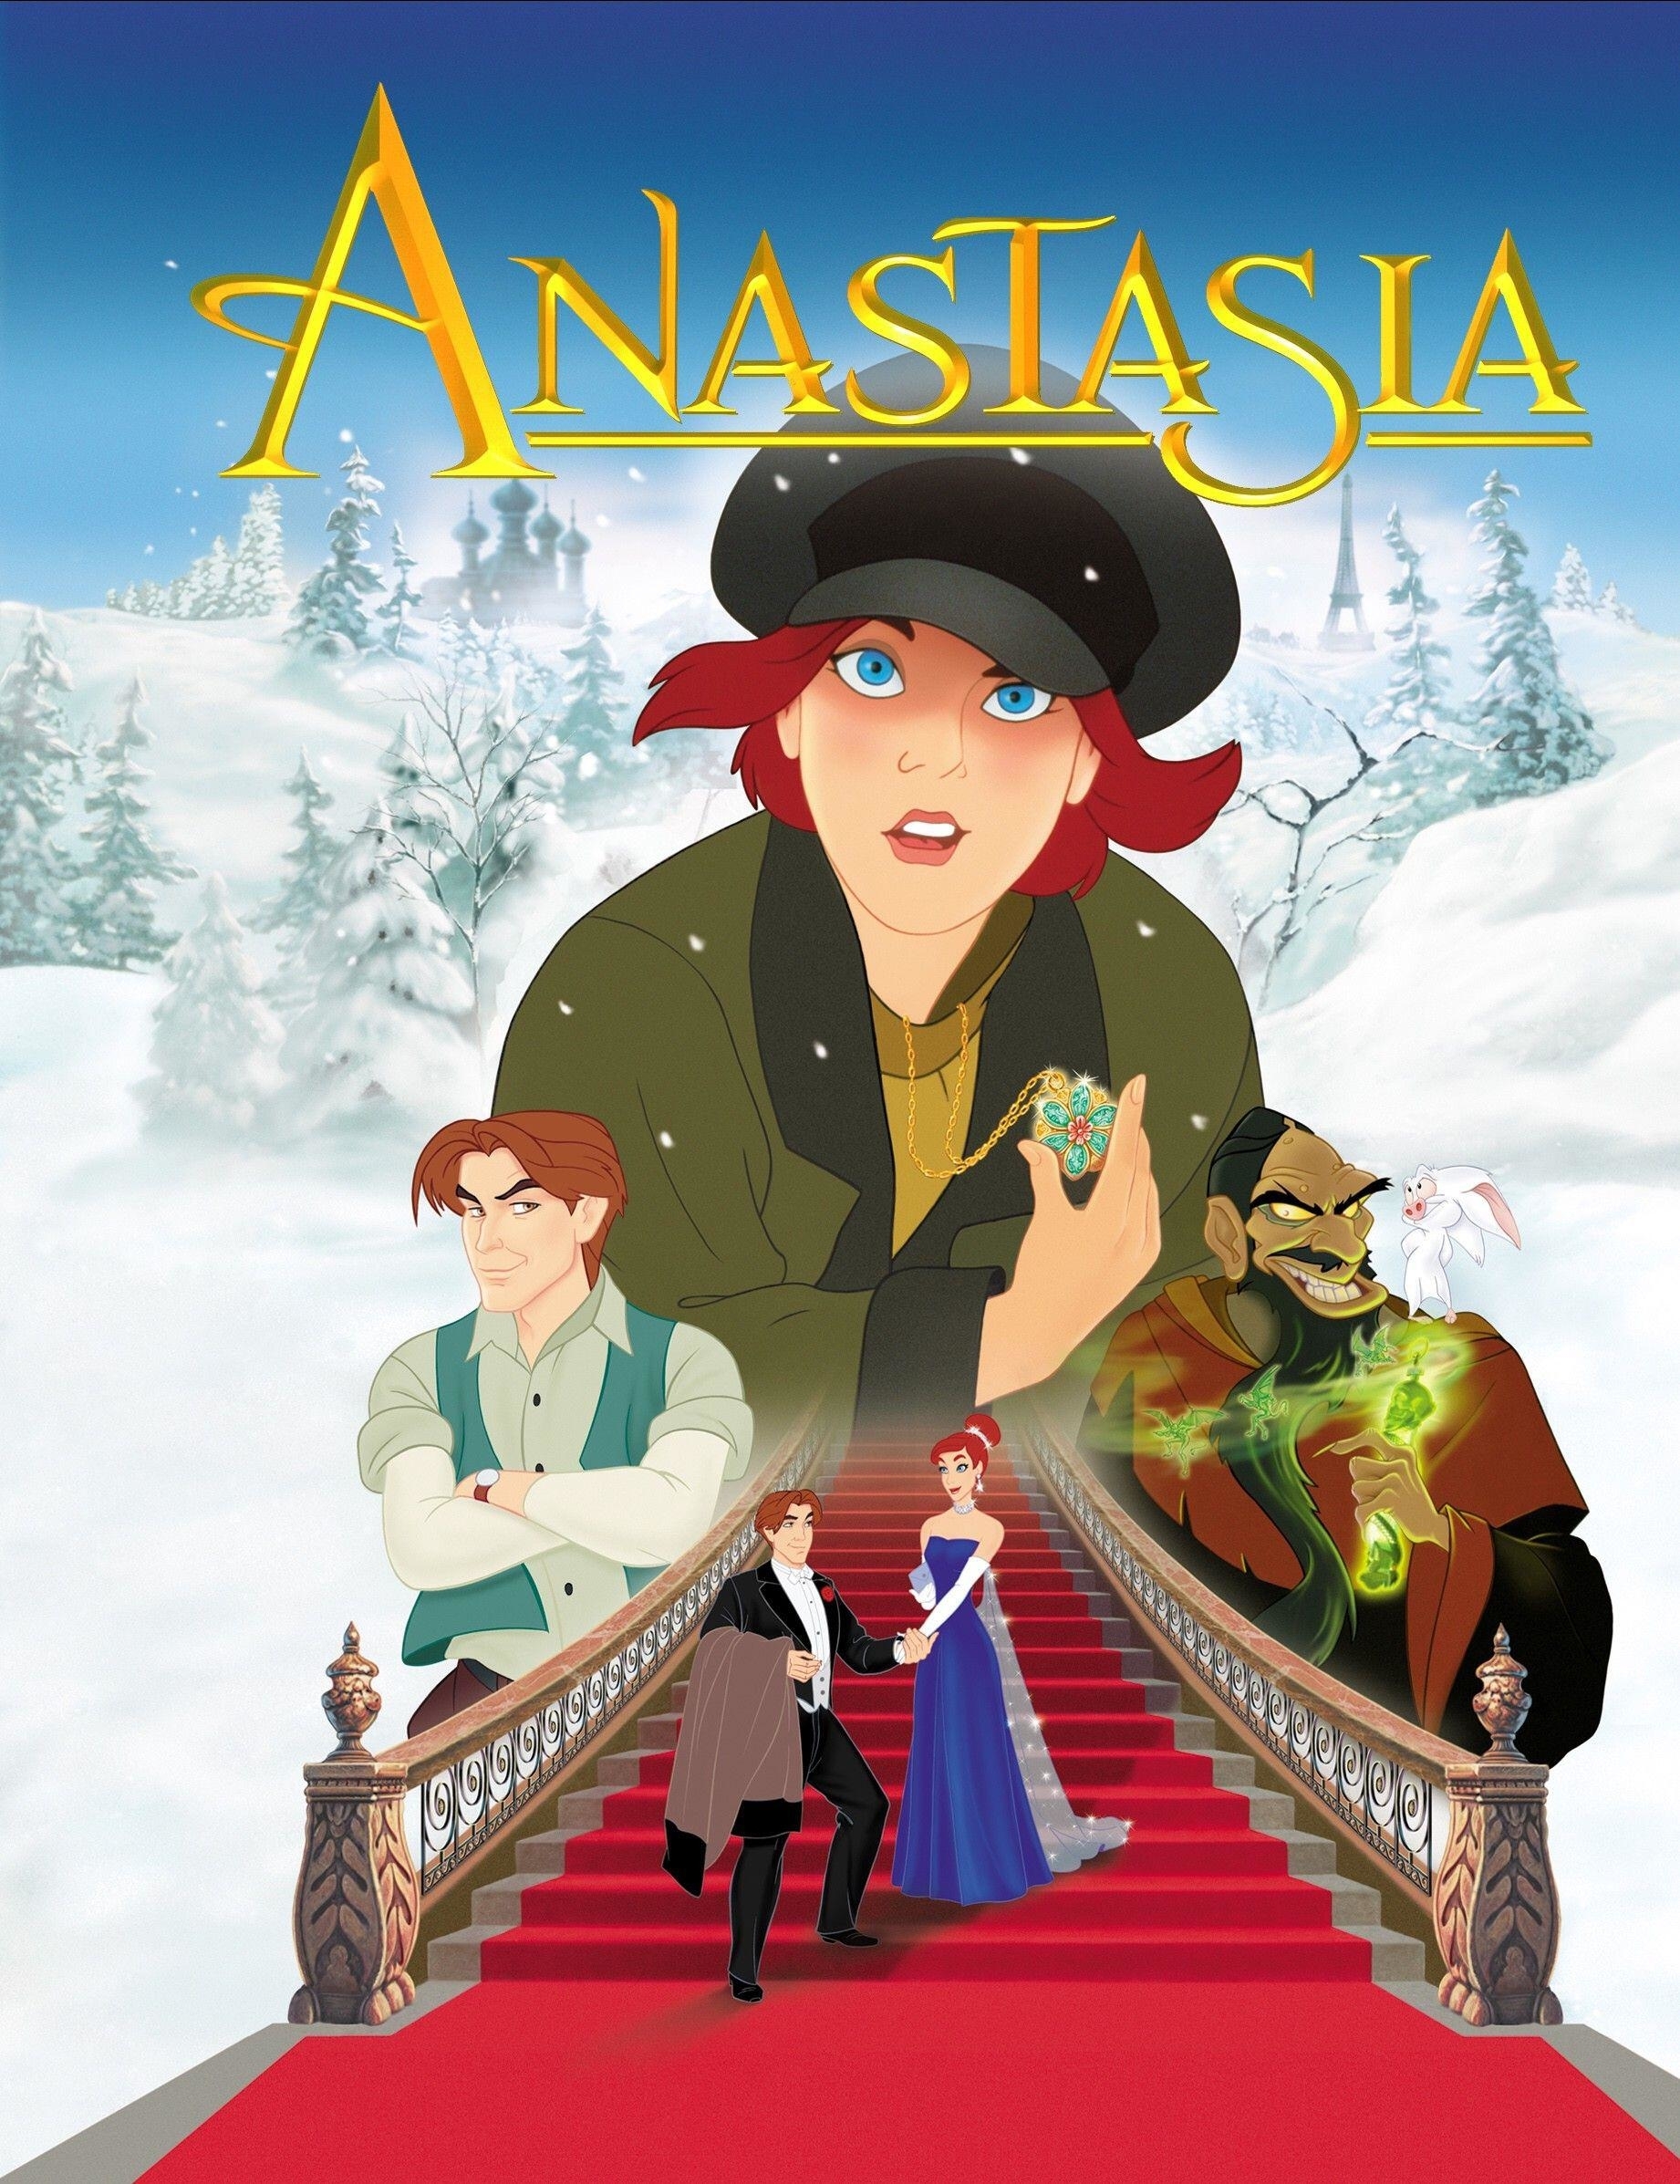 Poster for the animated film Anastasia, depicting the main characters face seeming confused at the top, the costar and villain of the film flanking her, and a scene below her of Anastasia being led down a flight of red stairs in a ballroom dress.